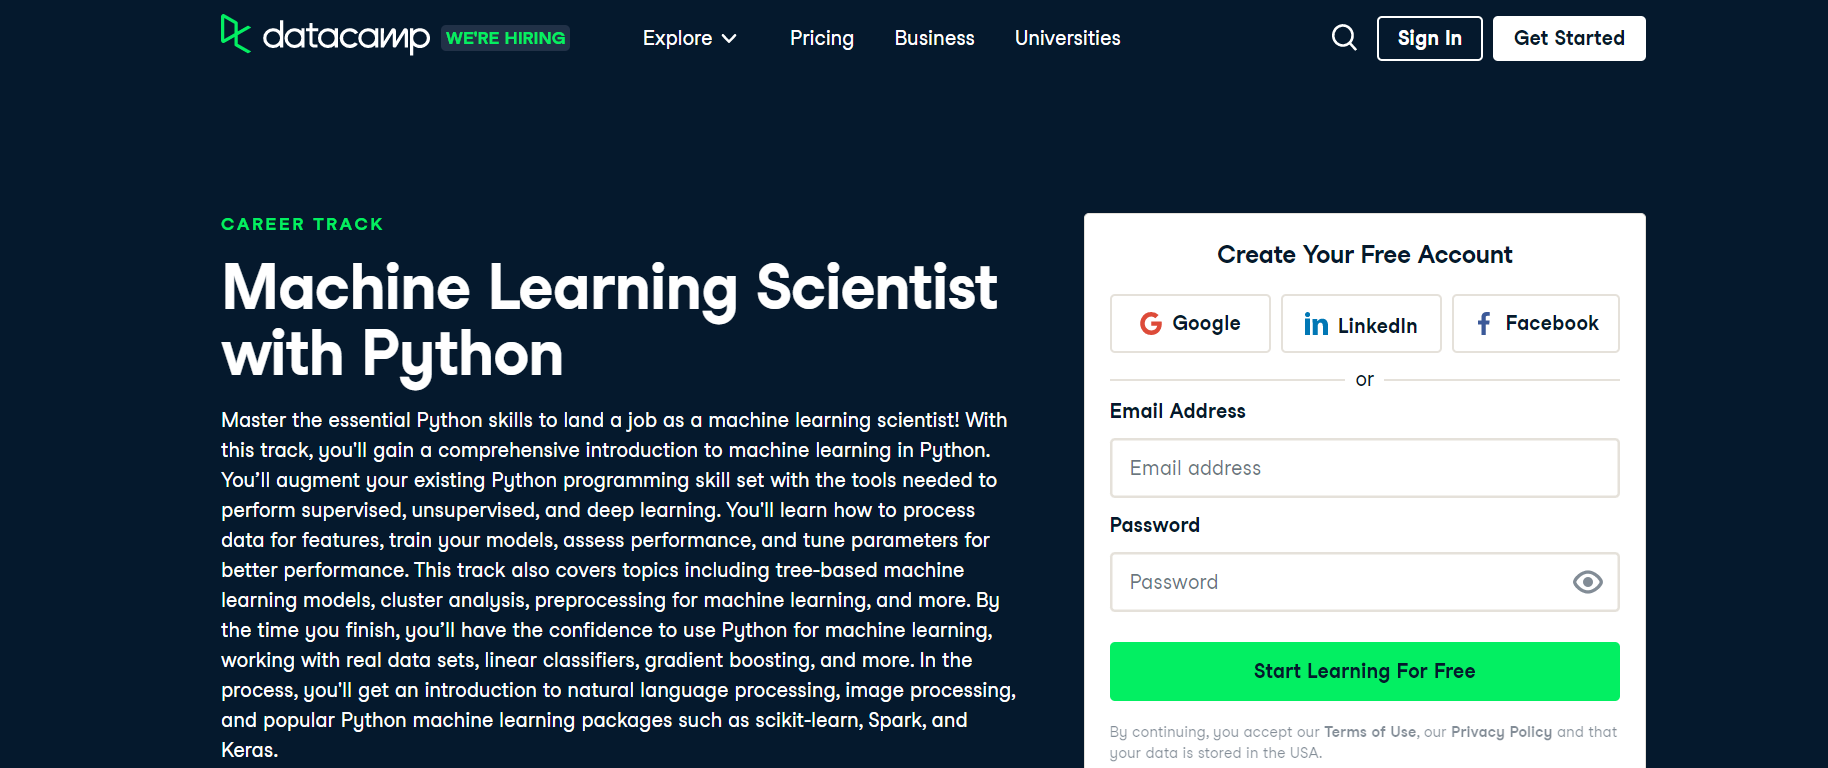 Machine Learning Scientist with Python